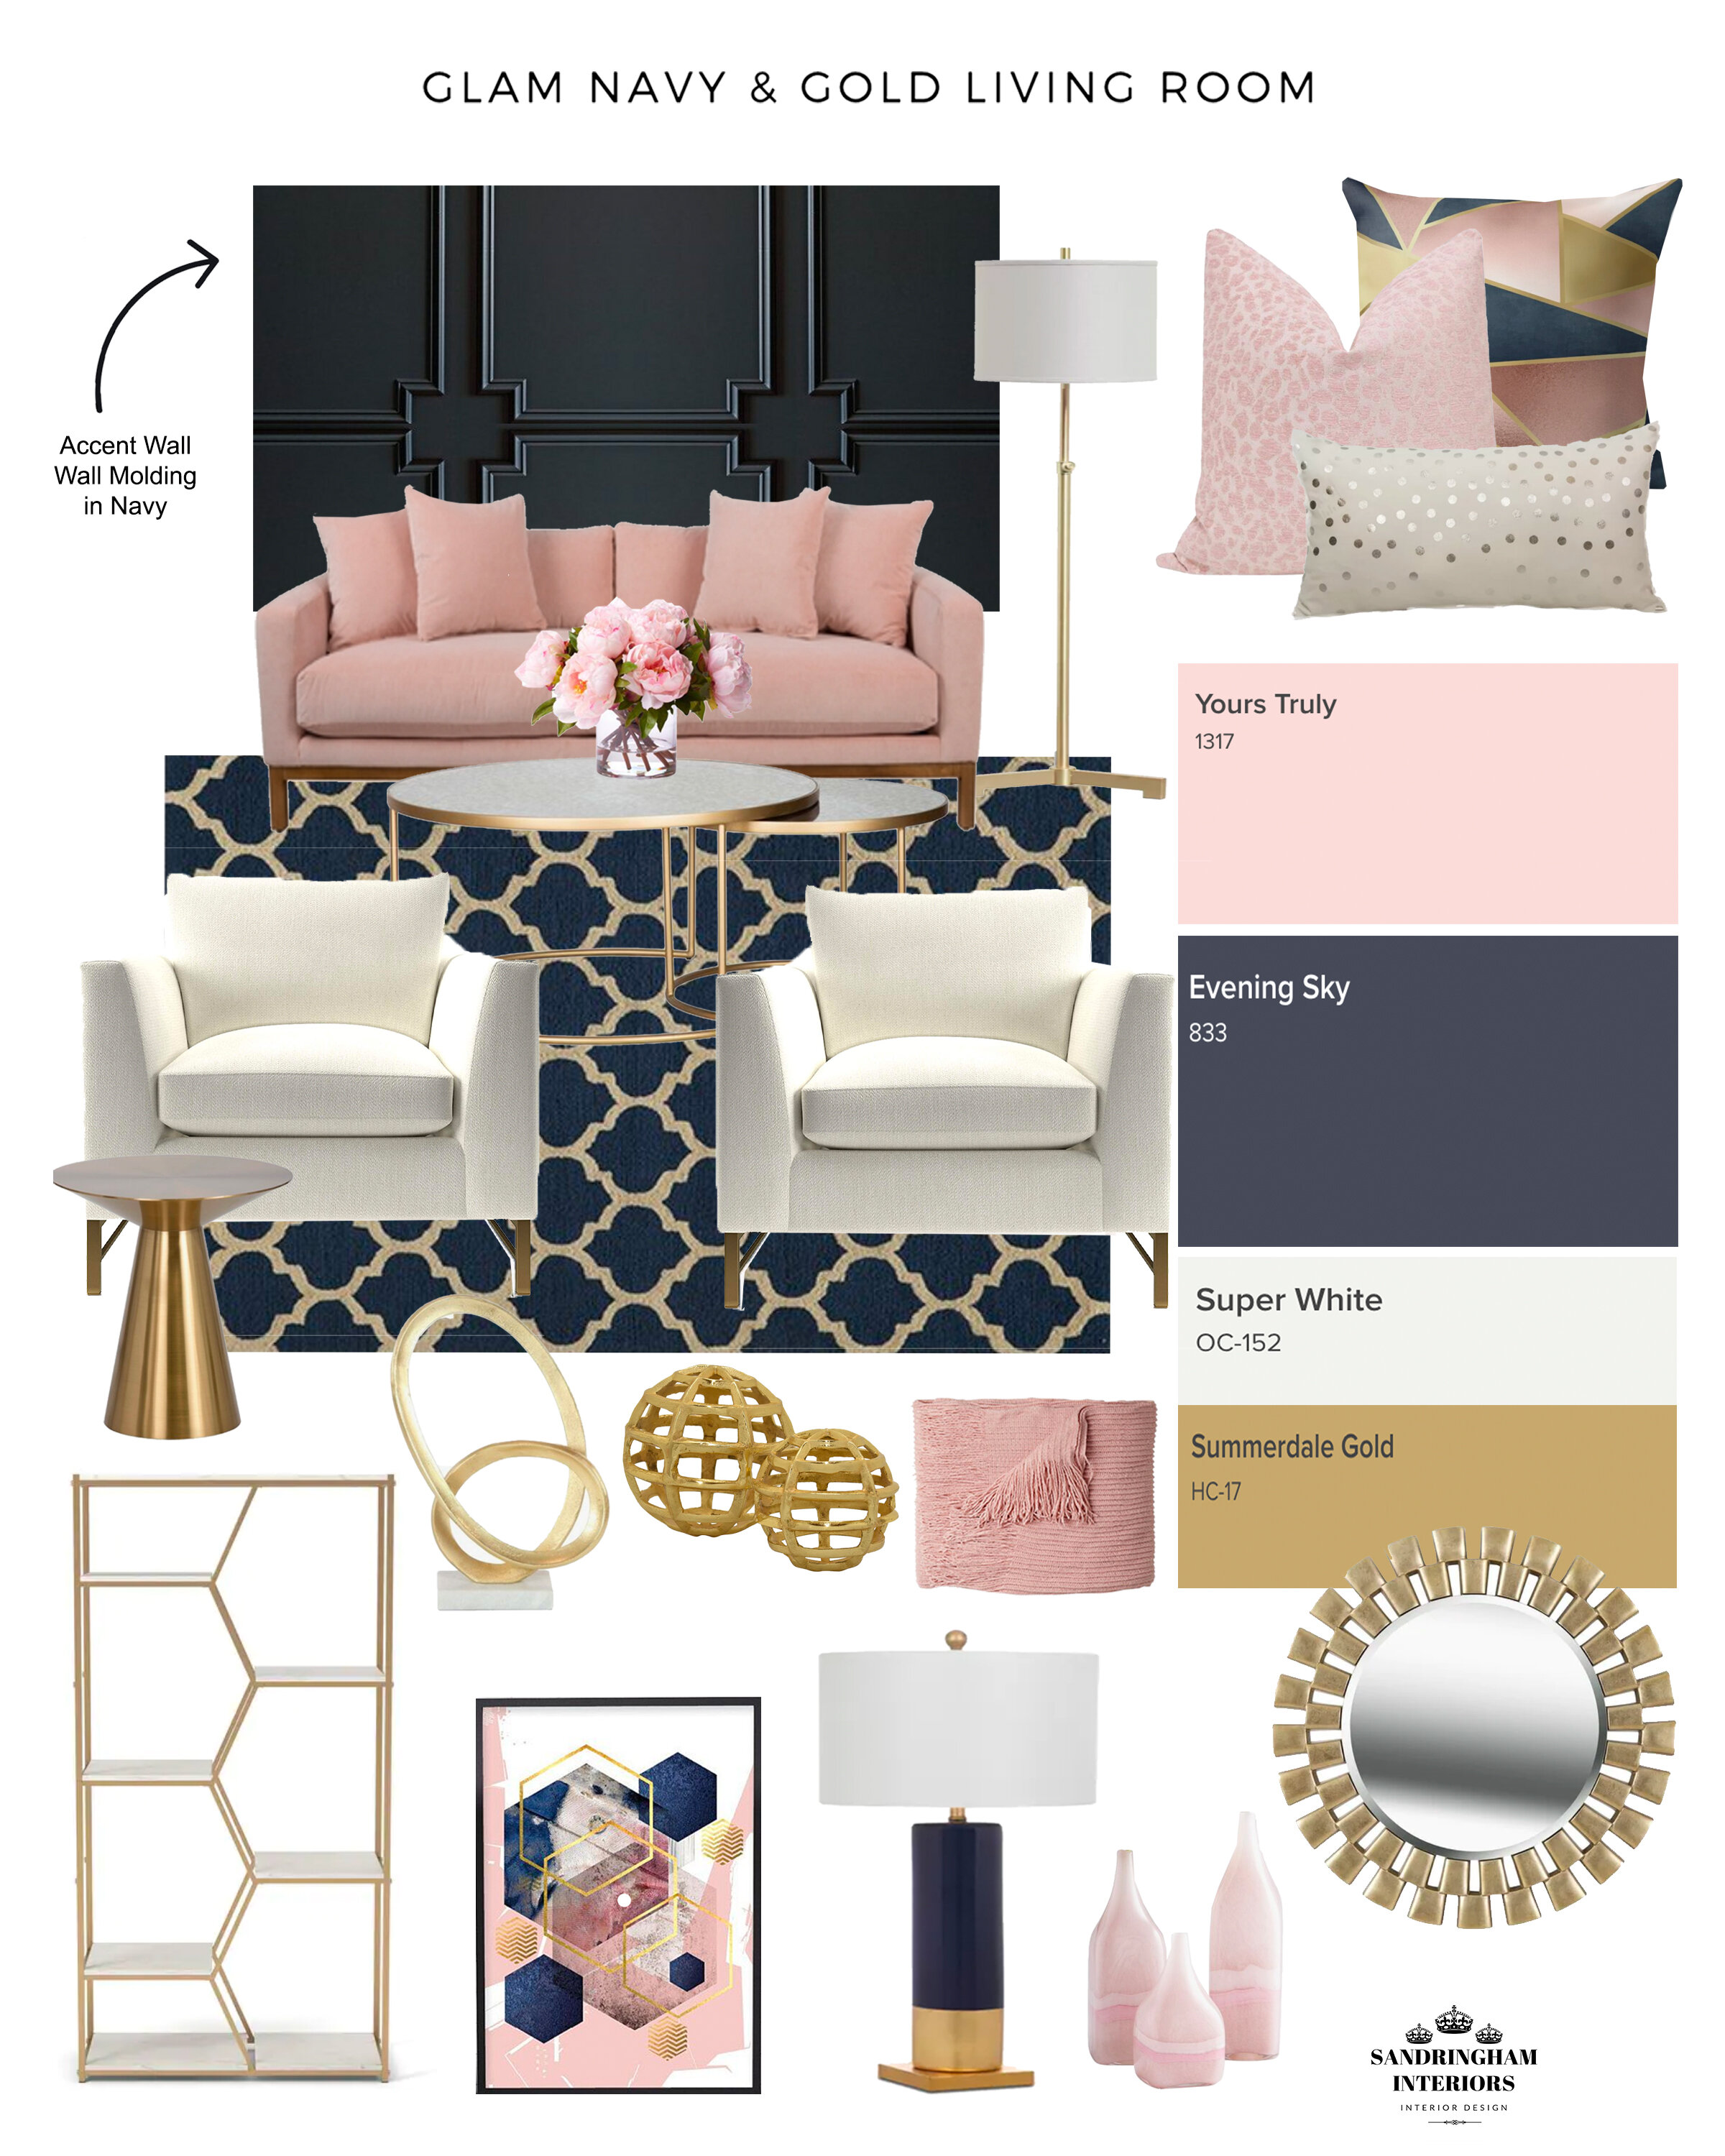 Glam Navy Pink Gold Living Room, Gold Feature Wall Living Room Design